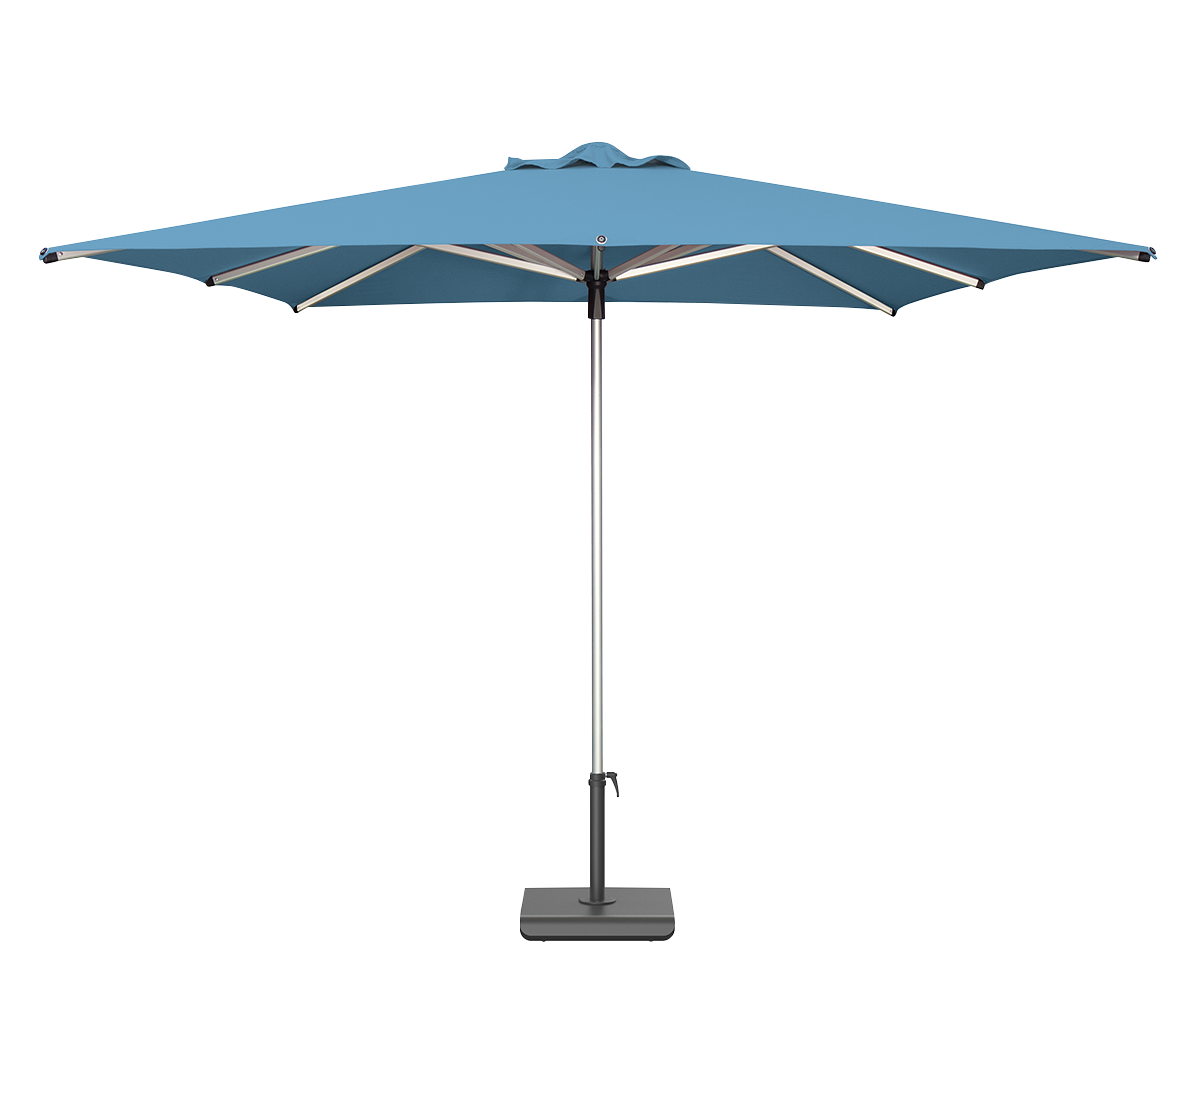 The Libra’s simplistic design features an easy to use push up system with secure automatic locking. The Libra’s internal counterweight design ensures the umbrella opens easily and glides to a close with ease.